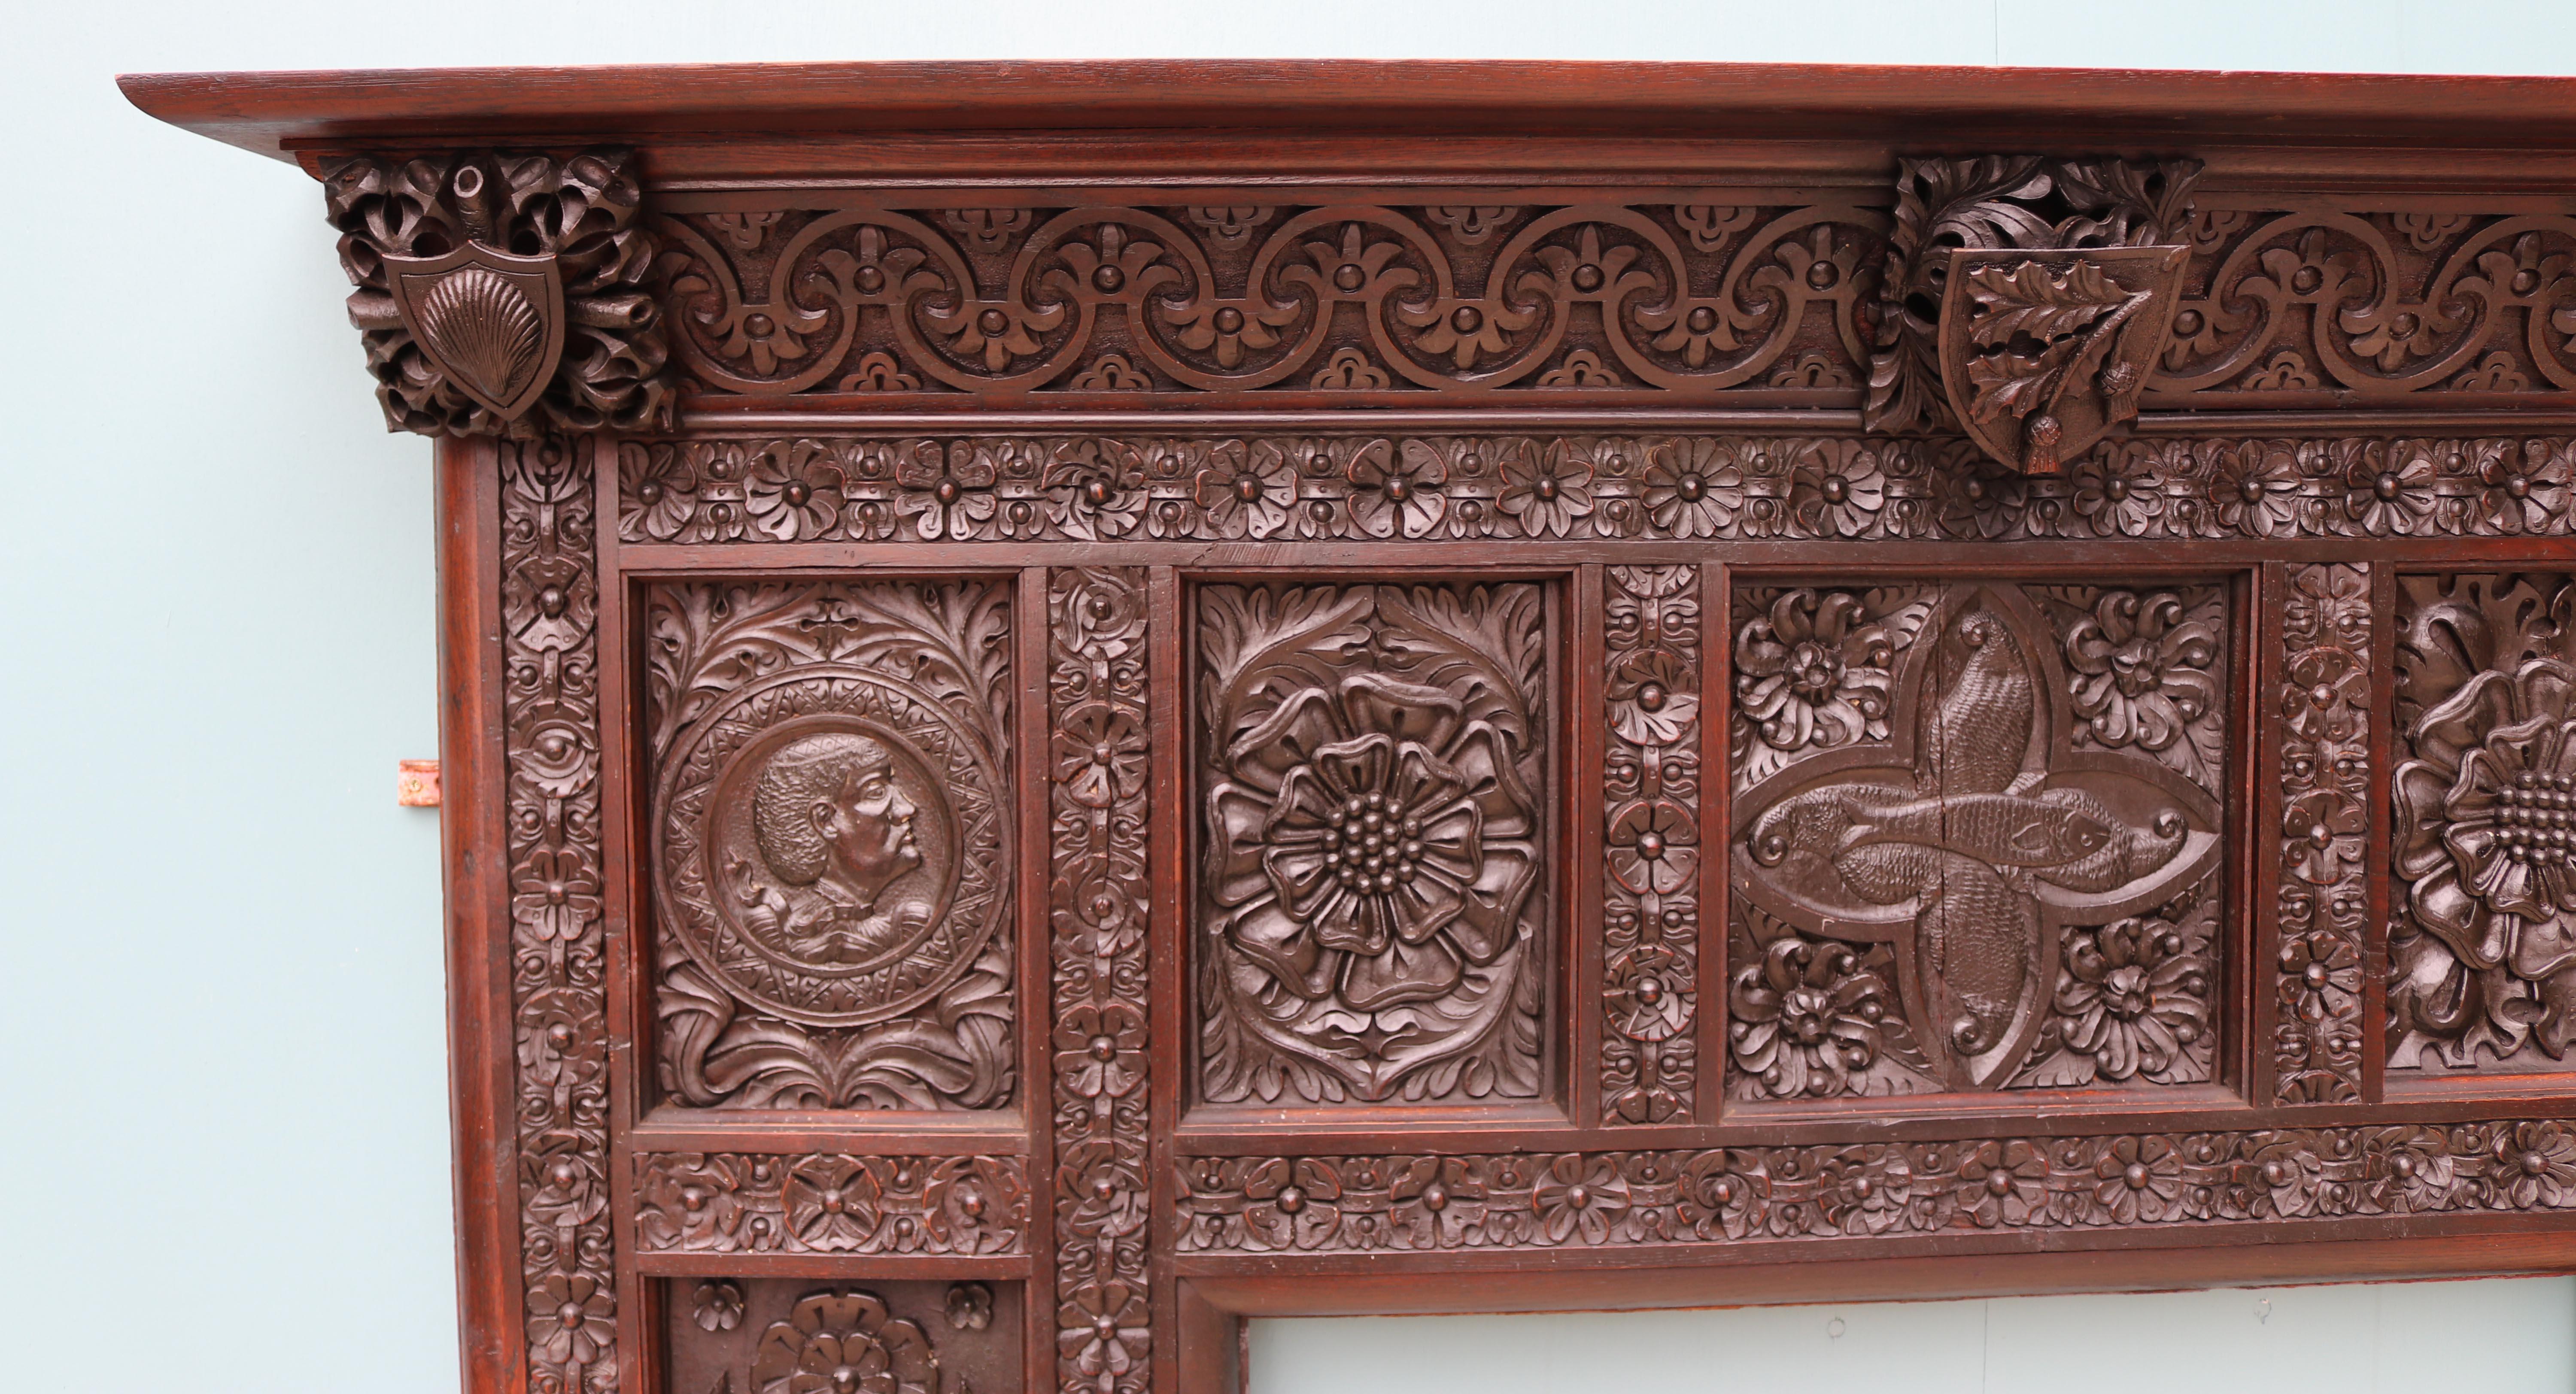 19th Century English Jacobean Revival Carved Oak Fireplace